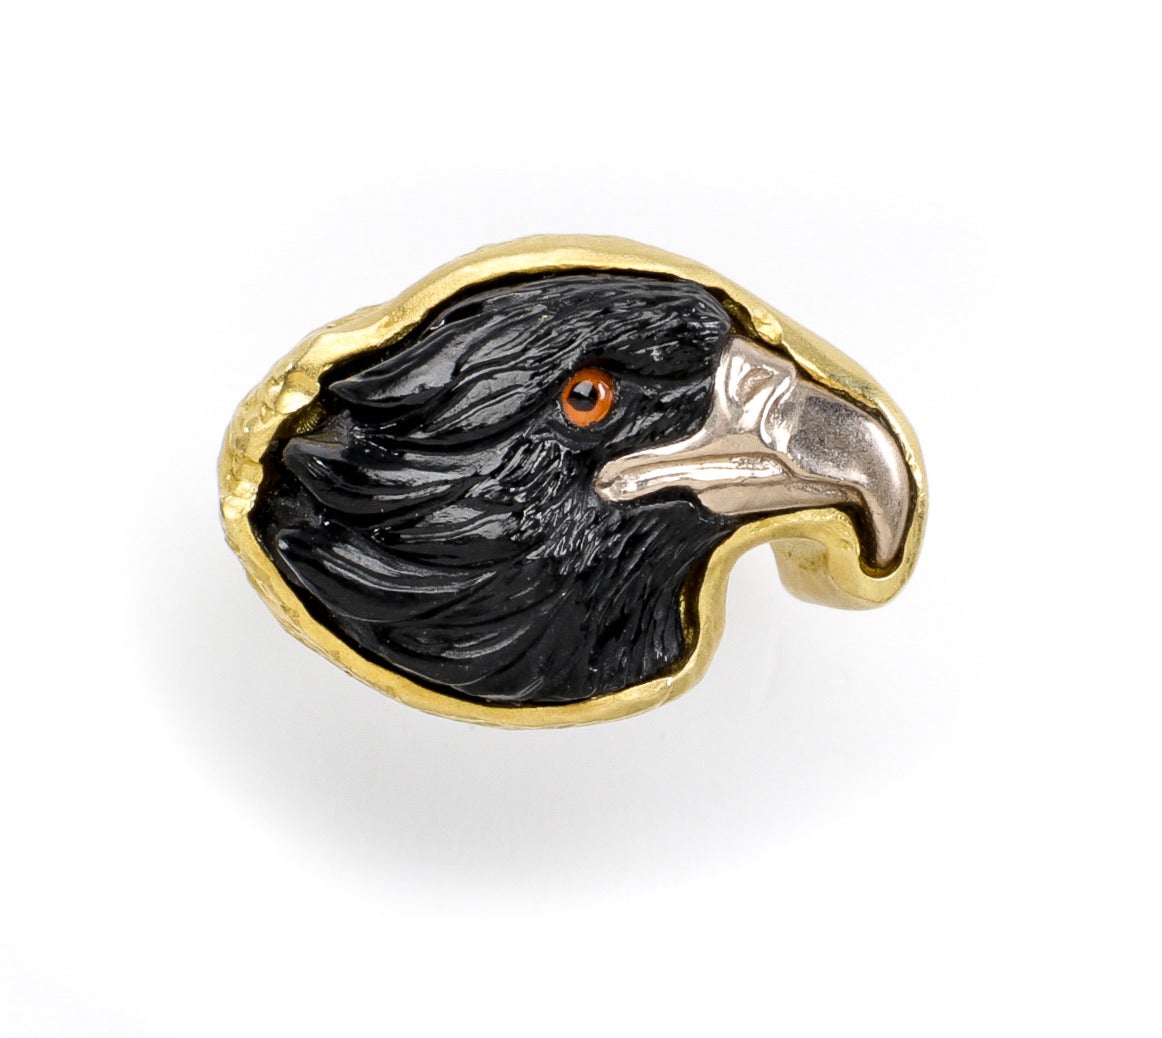 Beautifully detailed hand carved black jade eagle (by Master Idar-Oberstein carver) with a silver beak and hand painted crystal eye. Eagle is right facing and set in a hand crafted 18 karat yellow brushed gold deep shank.  Also available in earrings